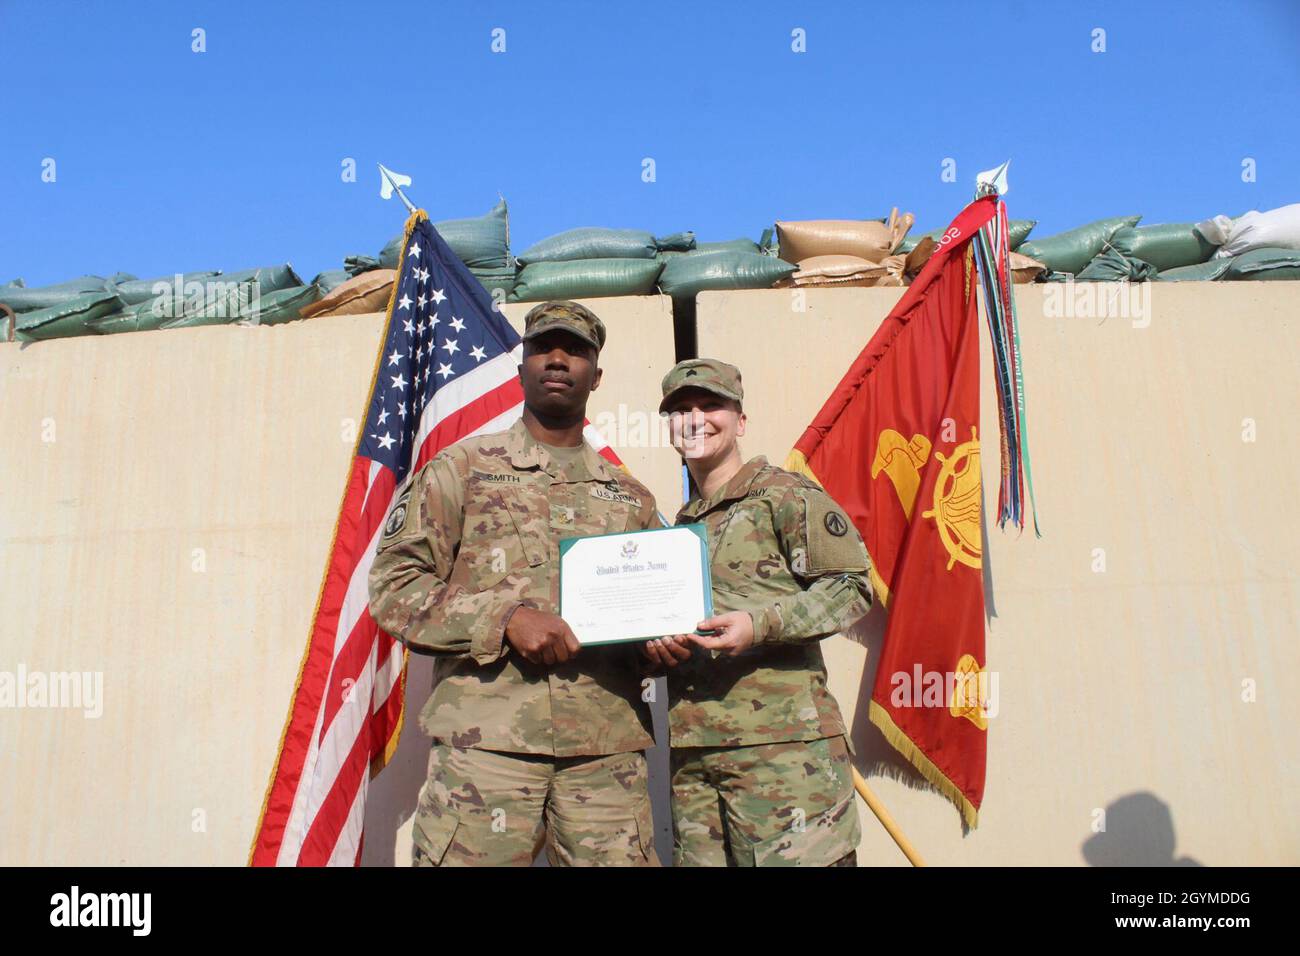 Maj. Patrick Smith, 840th Transportation Battalion, and Sgt. Ahslee S. Heckler, 840th Trans. Bn., pose with her certificate of reenlistment following her ceremony at Camp Arifjan, Kuwait, Jan. 31, 2020. (U.S. Army photo by Claudia LaMantia) Stock Photo